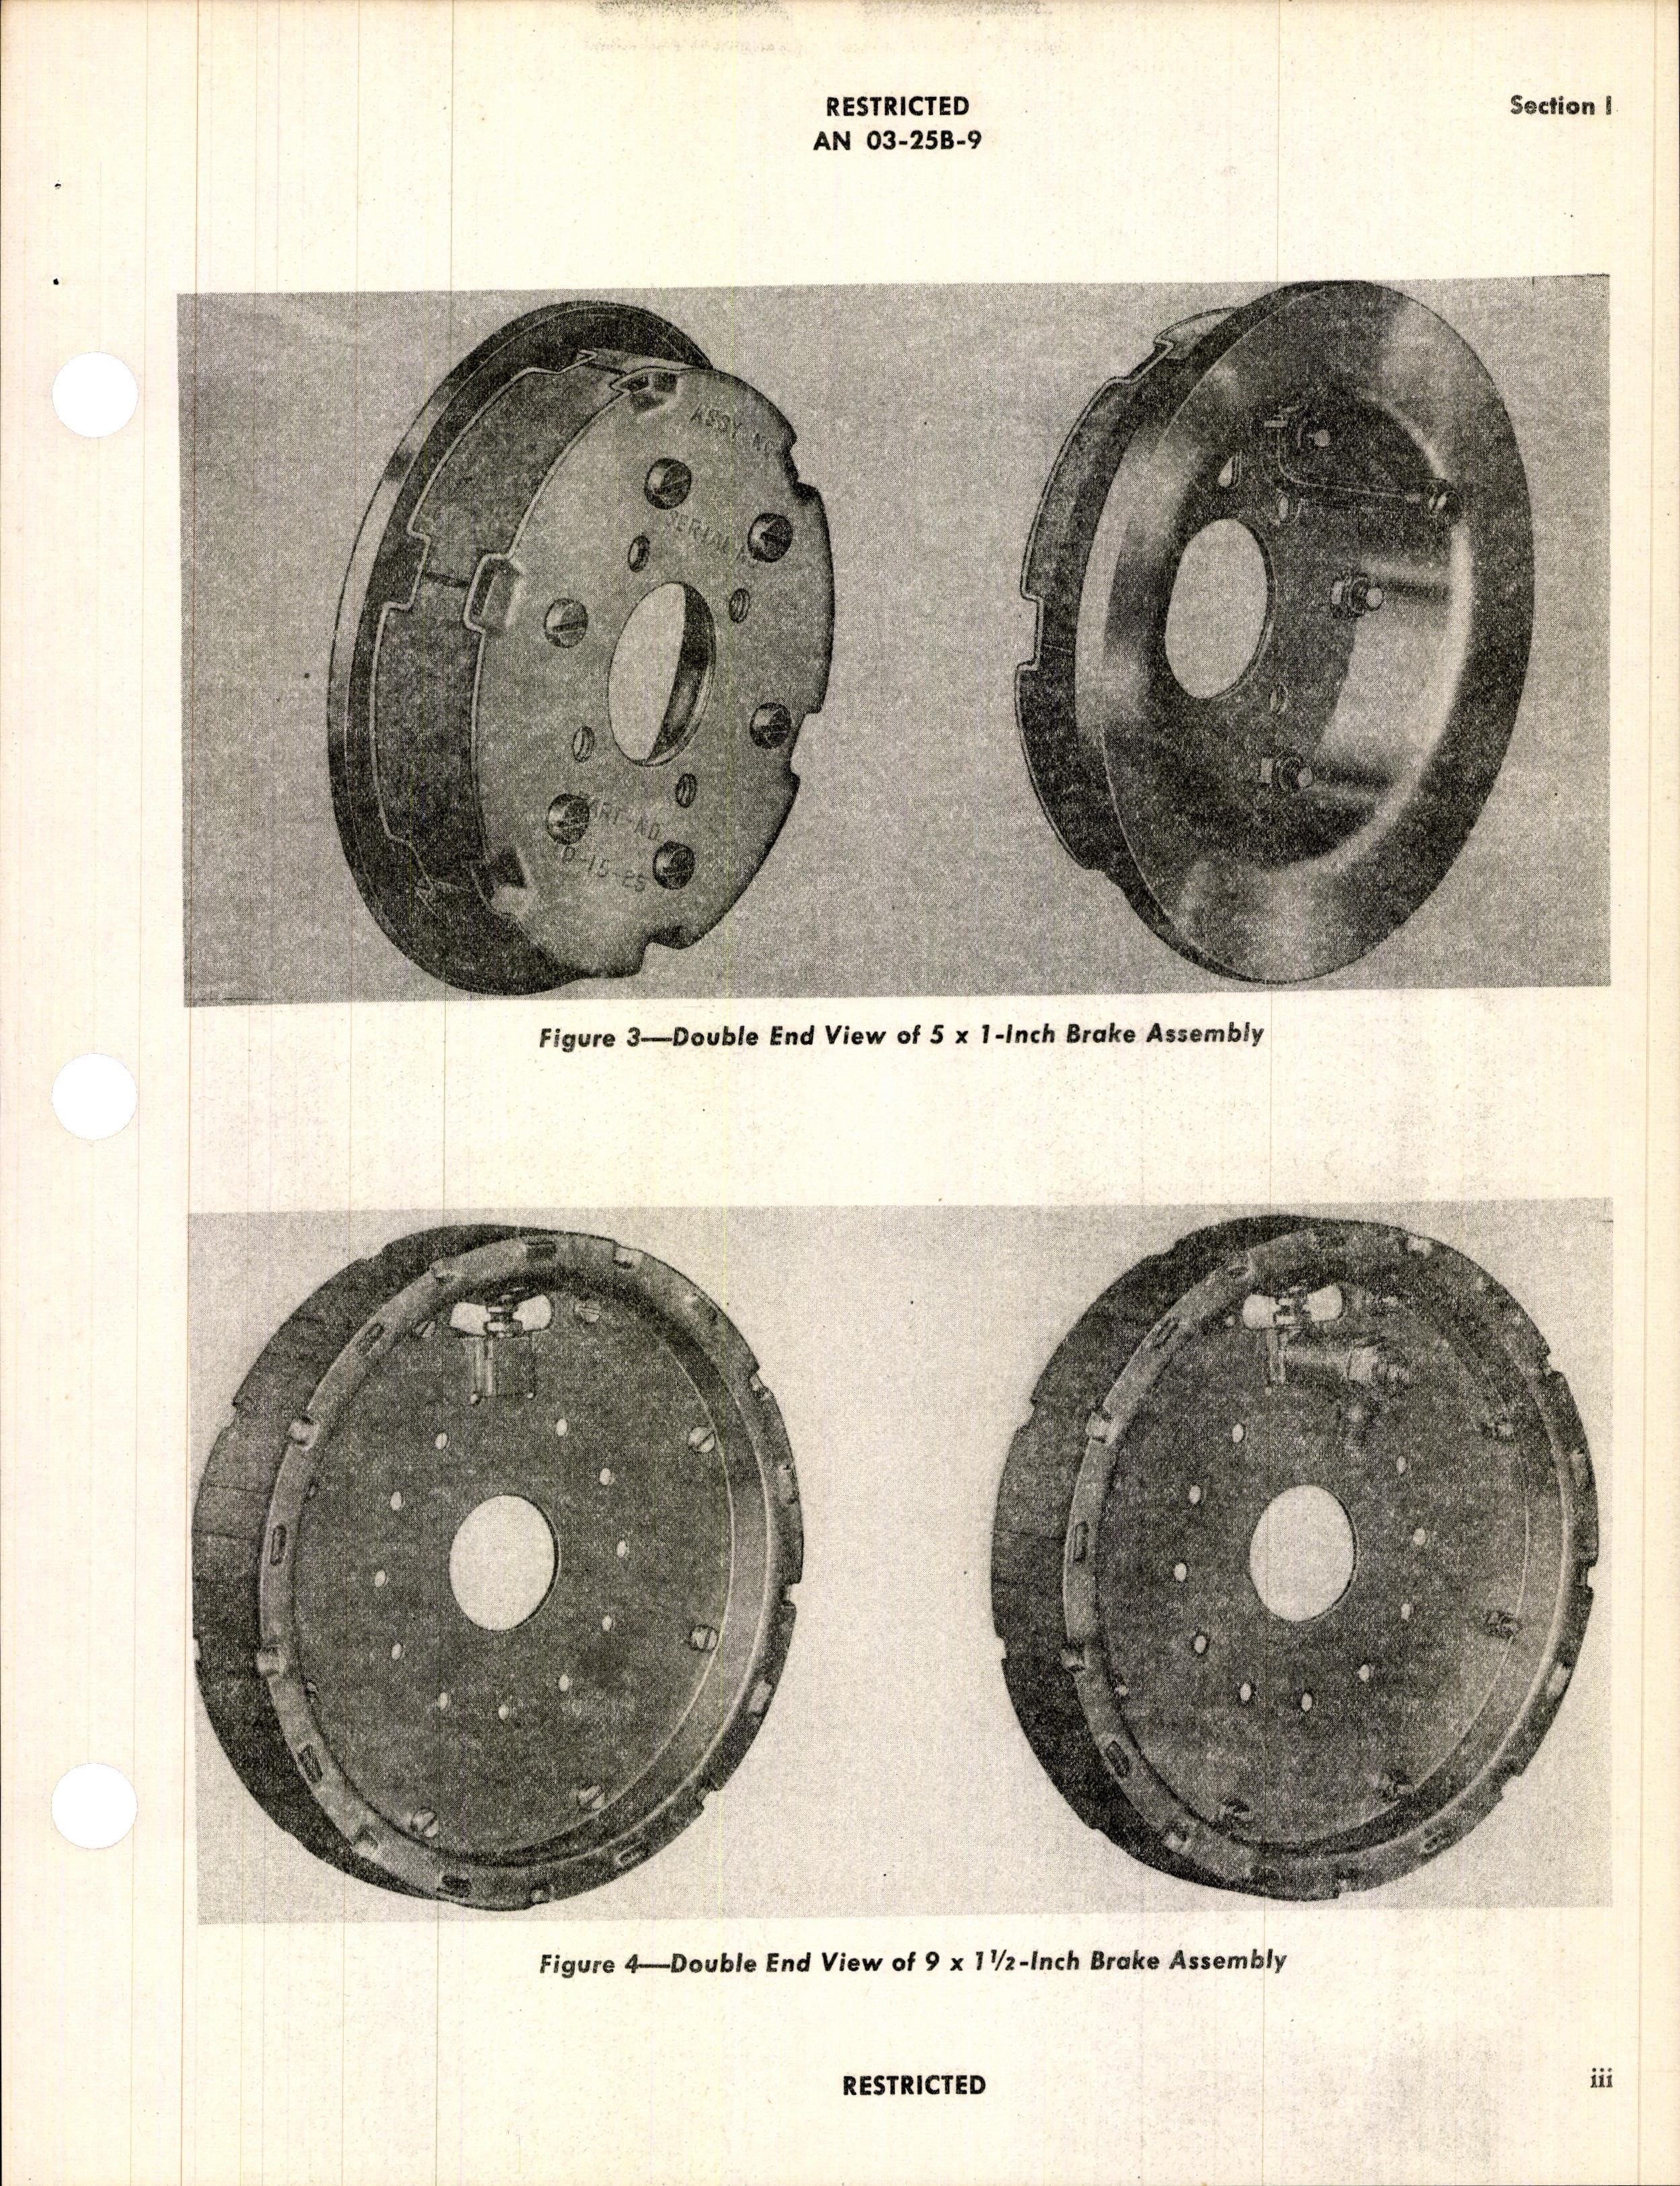 Sample page 5 from AirCorps Library document: Handbook of Instructions with Parts Catalog for Hayes Expander Tube Brakes